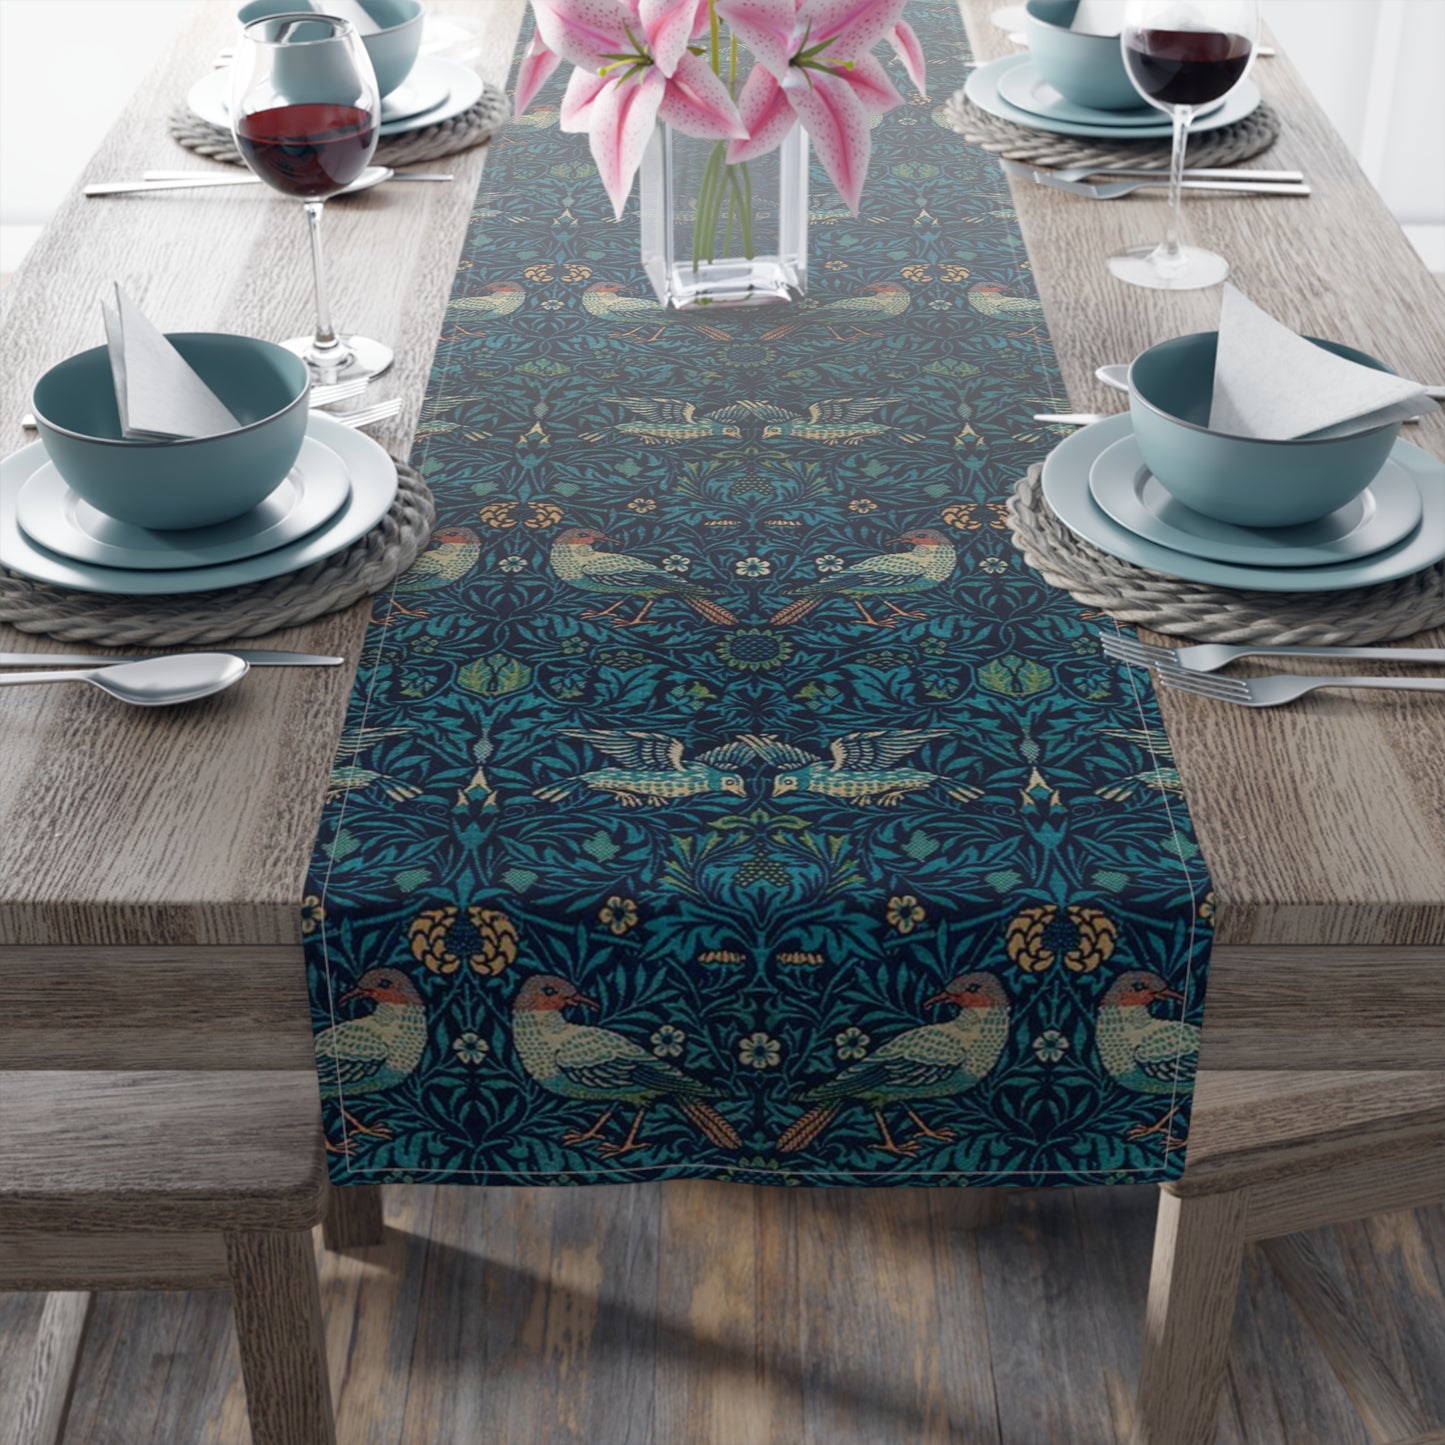 william-morris-co-table-runner-bluebird-collection-7